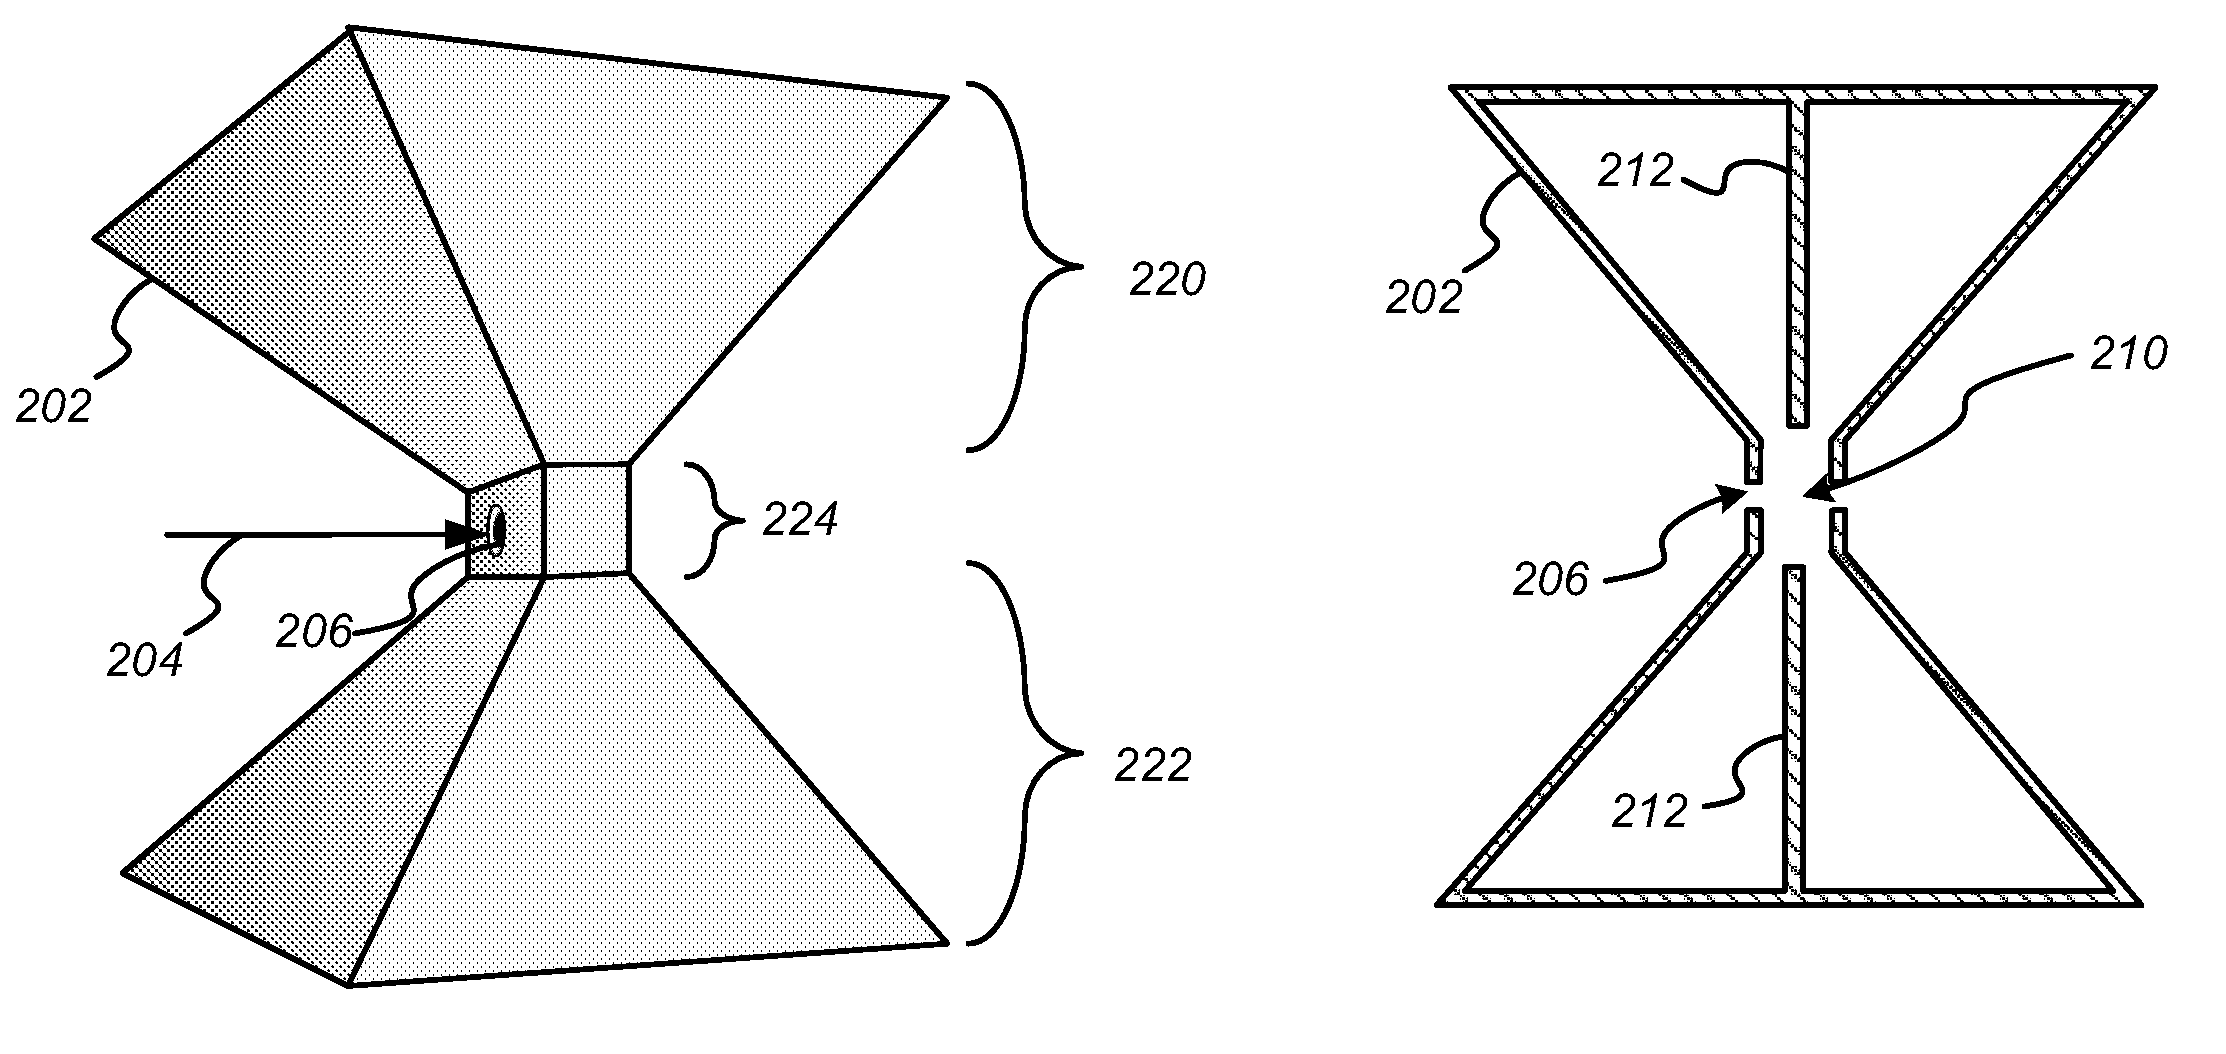 Bowtie deflector cavity for a linear beam device